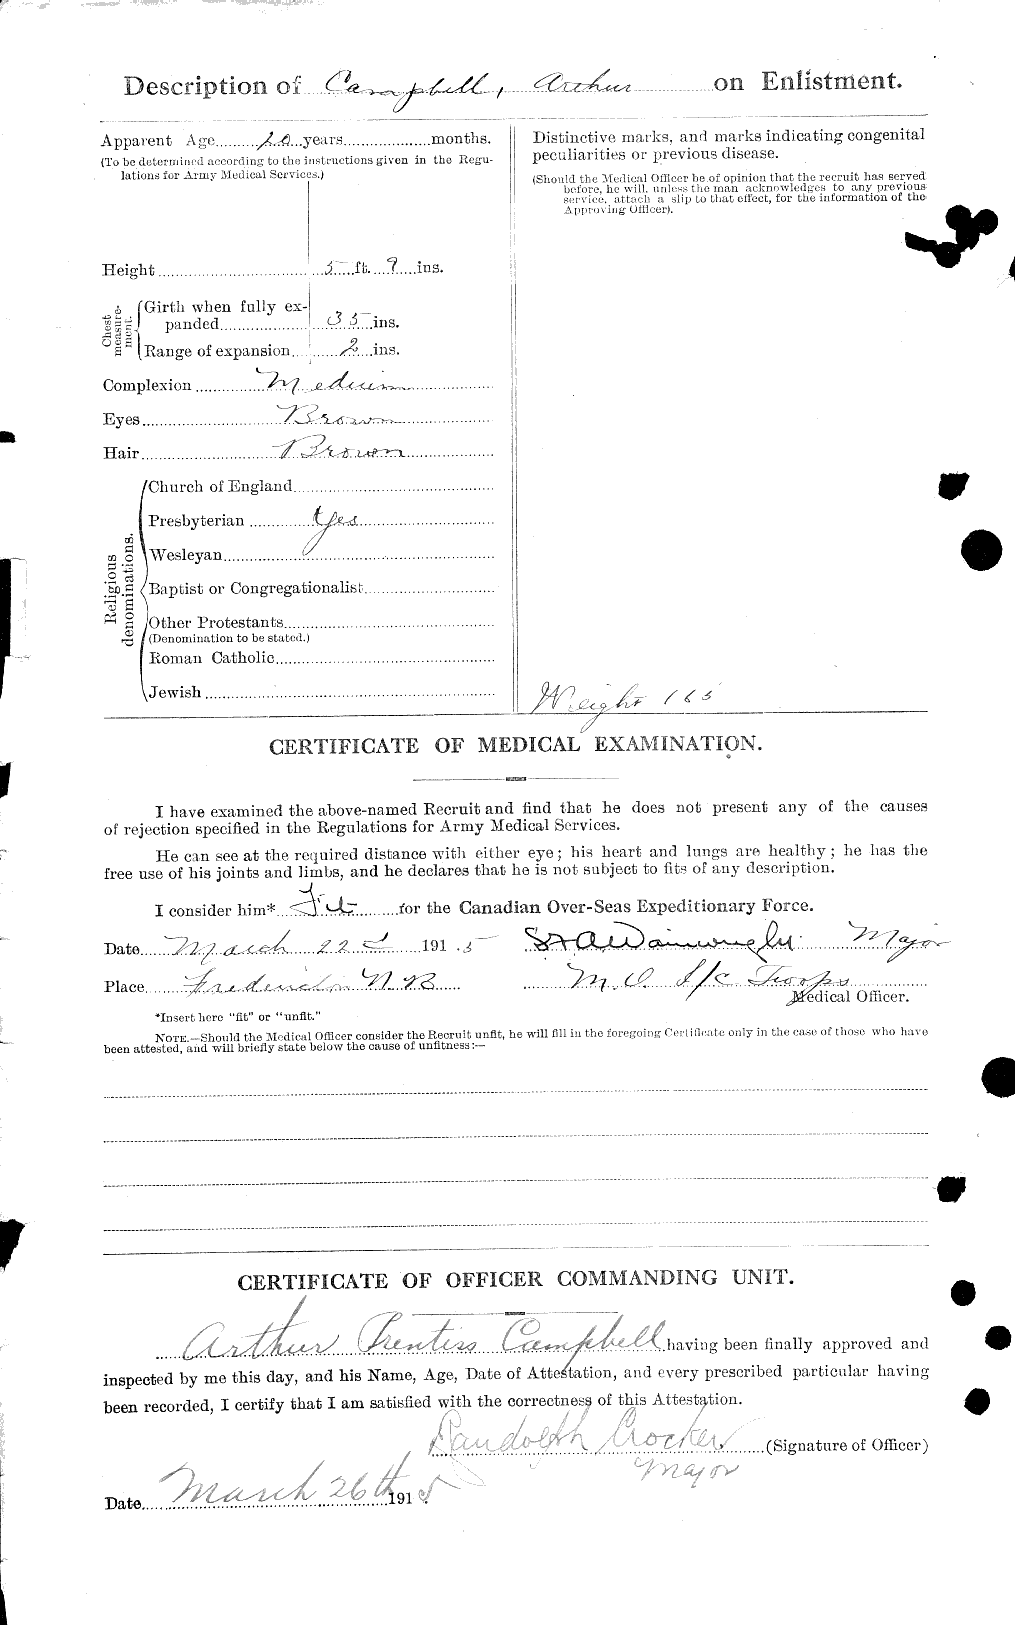 Personnel Records of the First World War - CEF 003517b